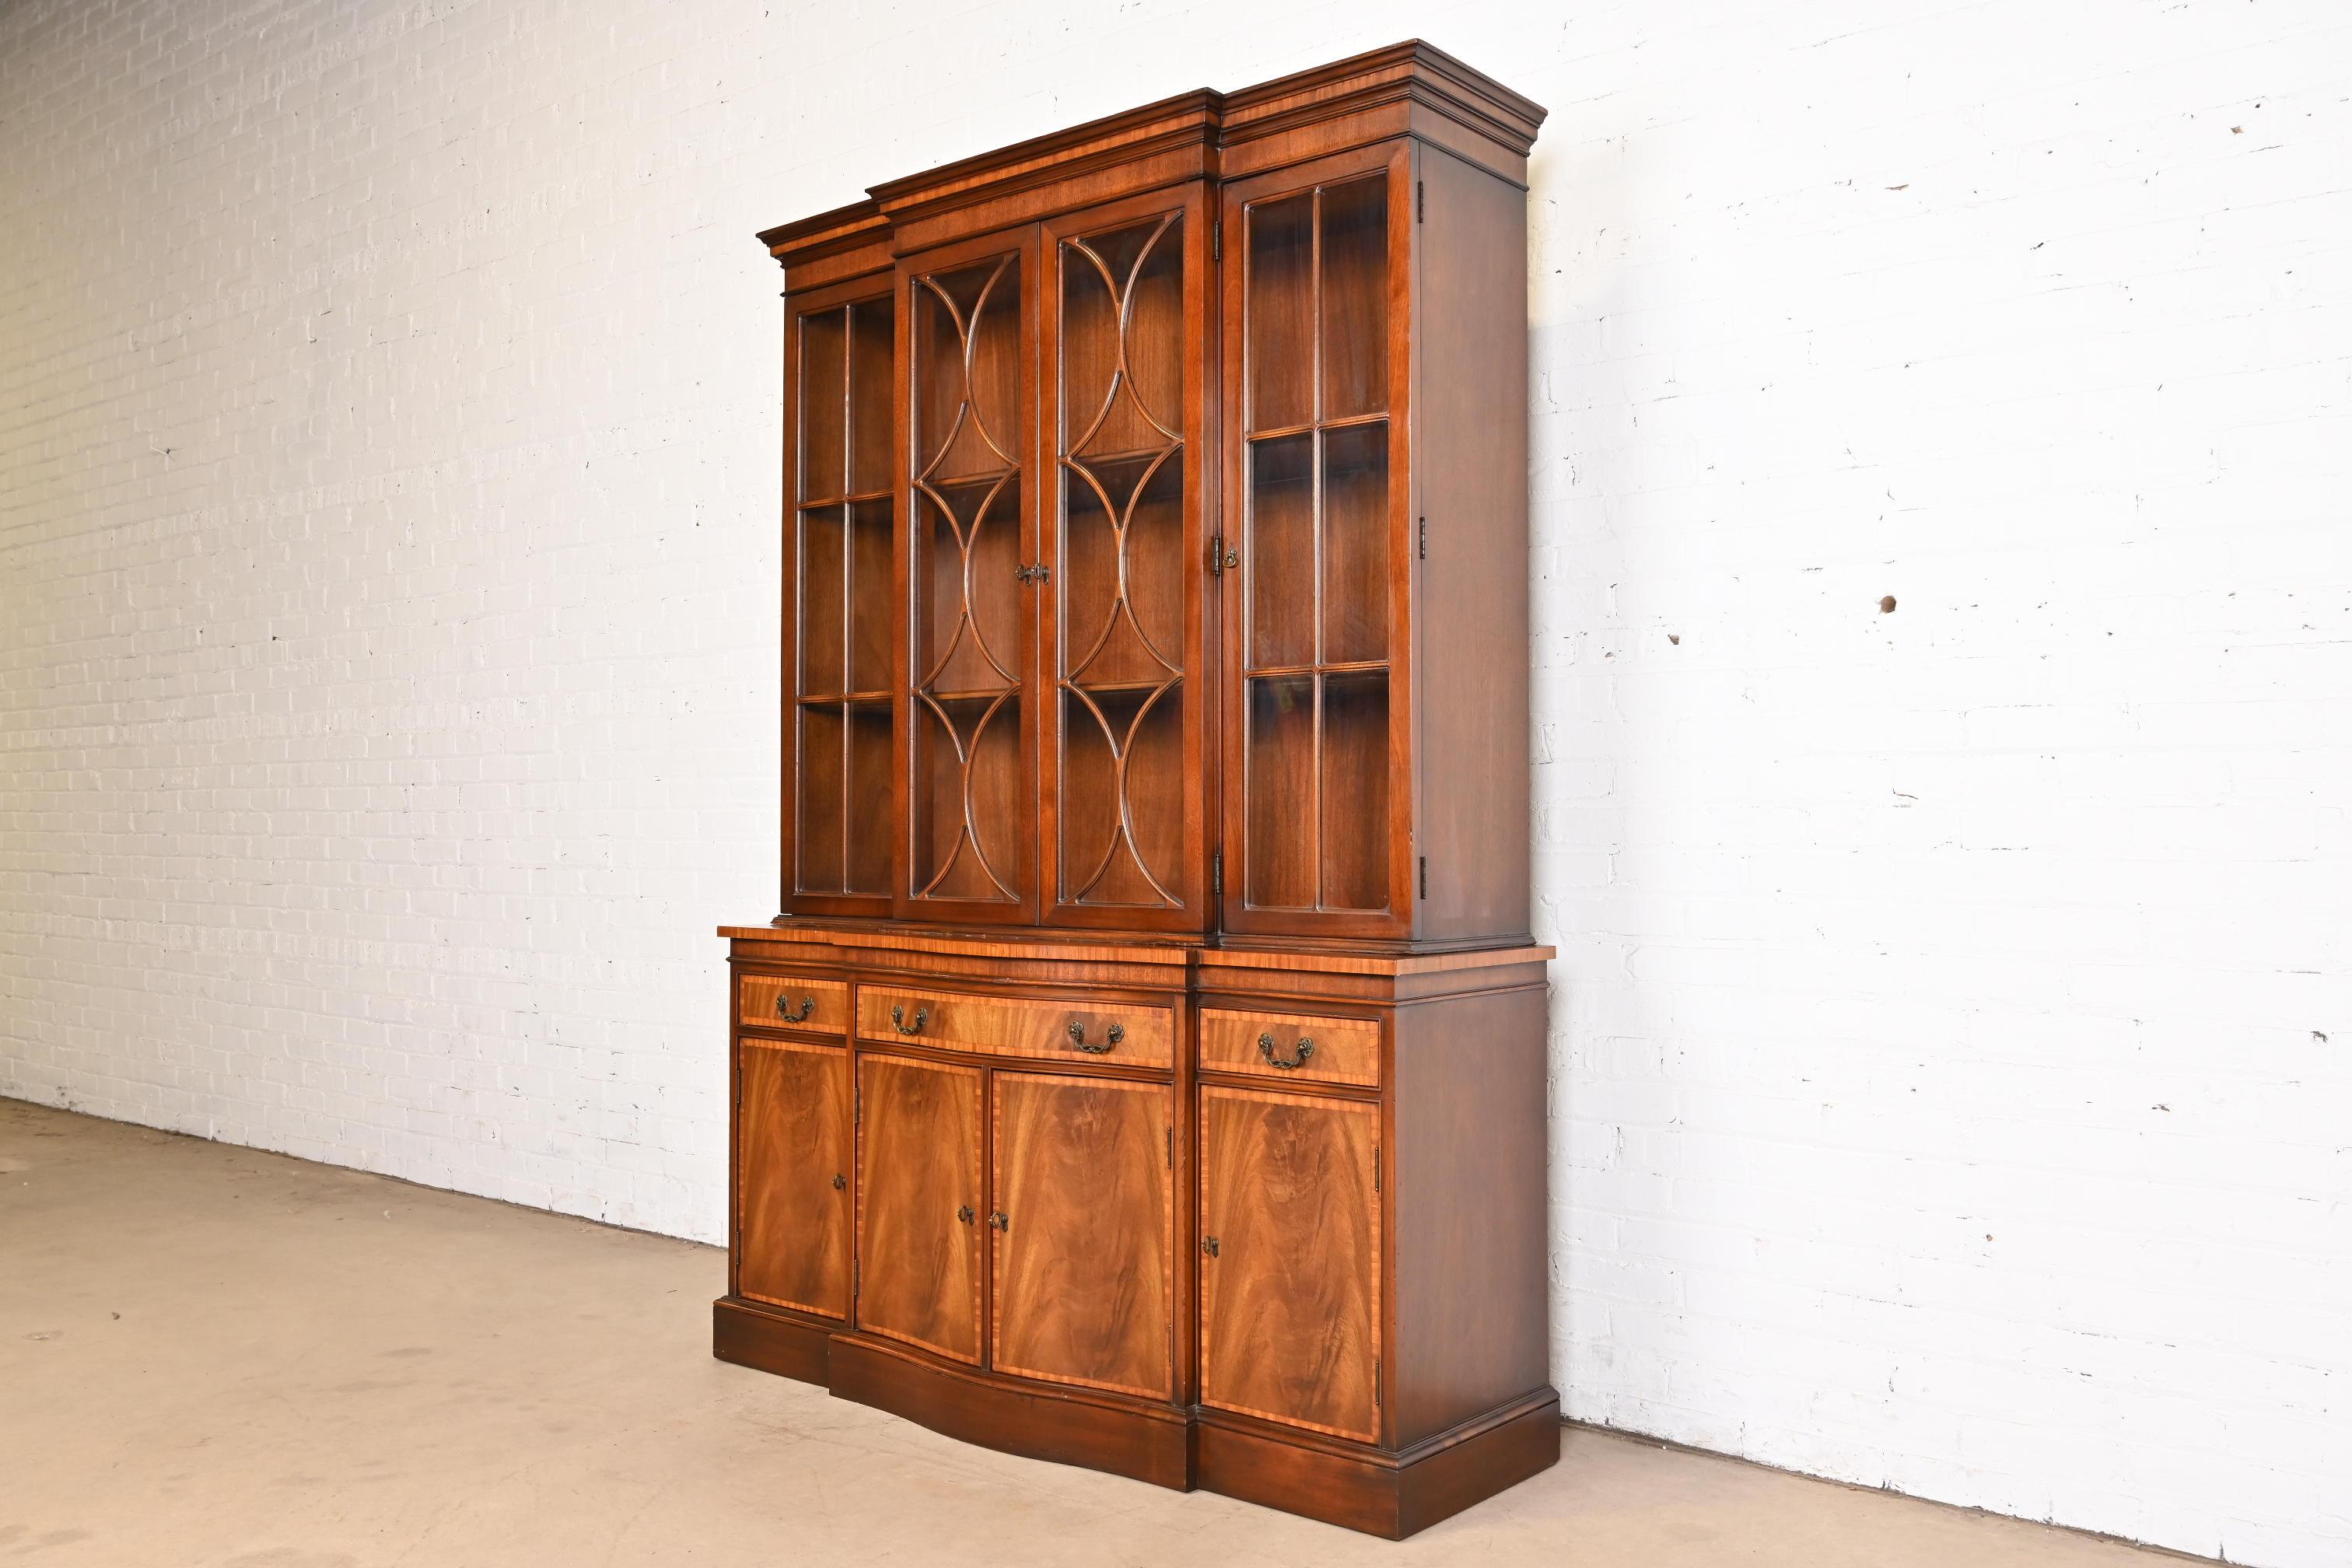 American Georgian Carved Flame Mahogany Breakfront Bookcase Cabinet by Fancher, 1940s For Sale